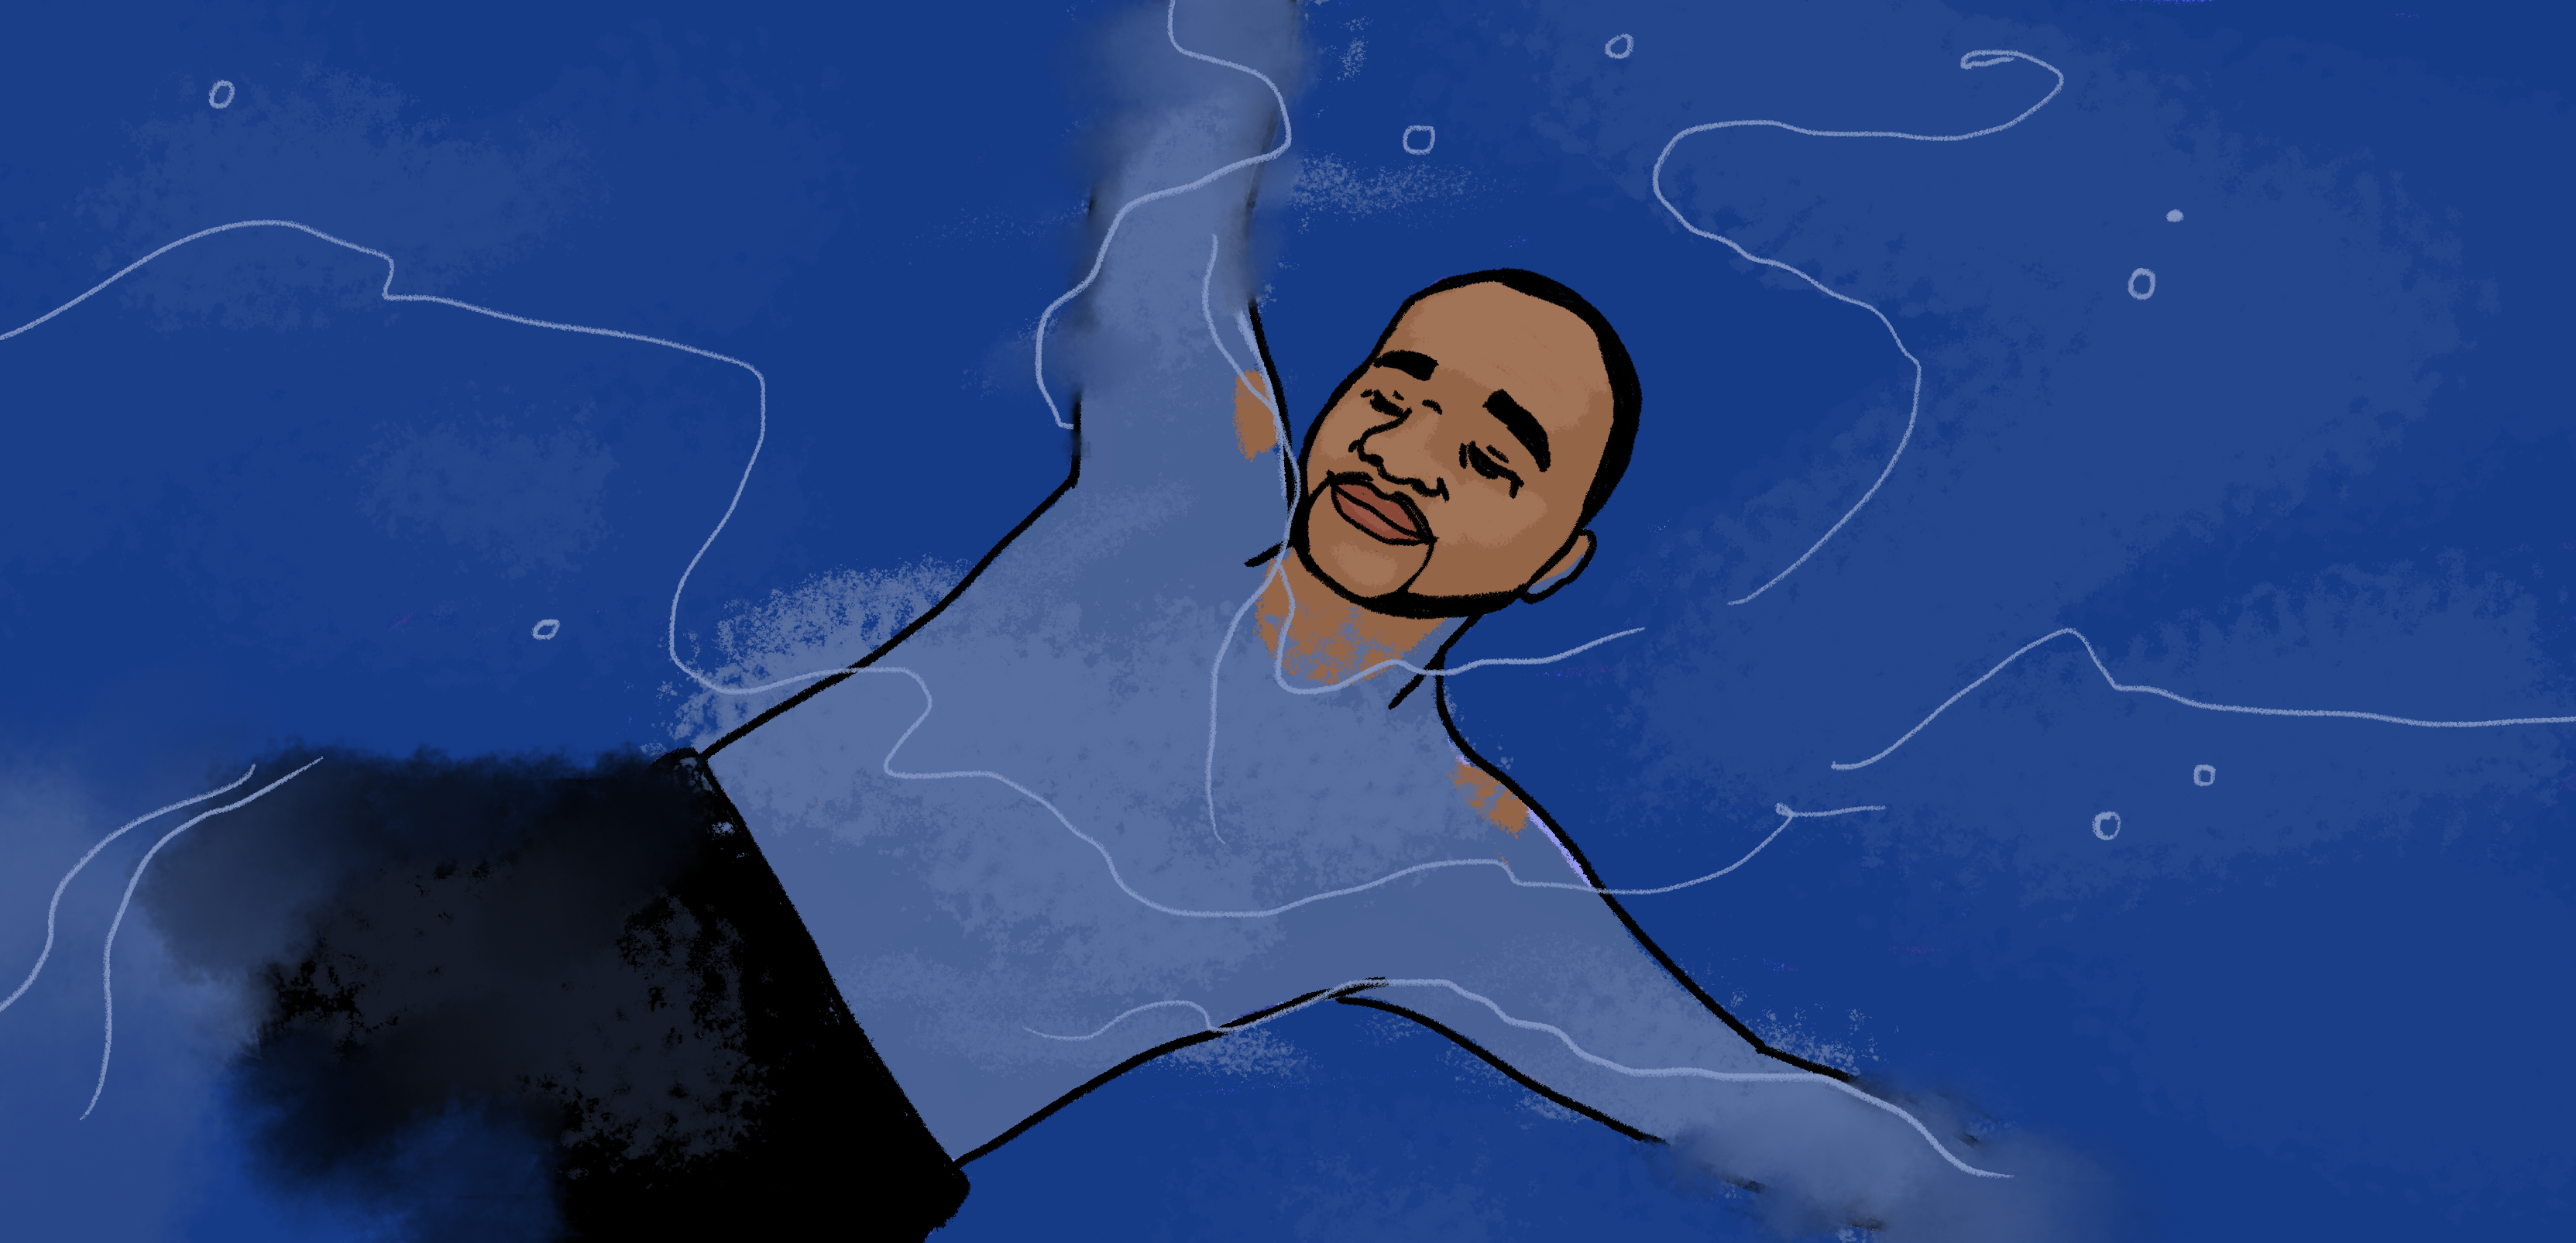 Image: An illustration portraying Brandon Wyatt swimming in Lake Michigan. He is floating calmly on his back with his arms stretched out; his head is above the water and he leans back with his eyes closed. Illustration by Peregrine Bermas.